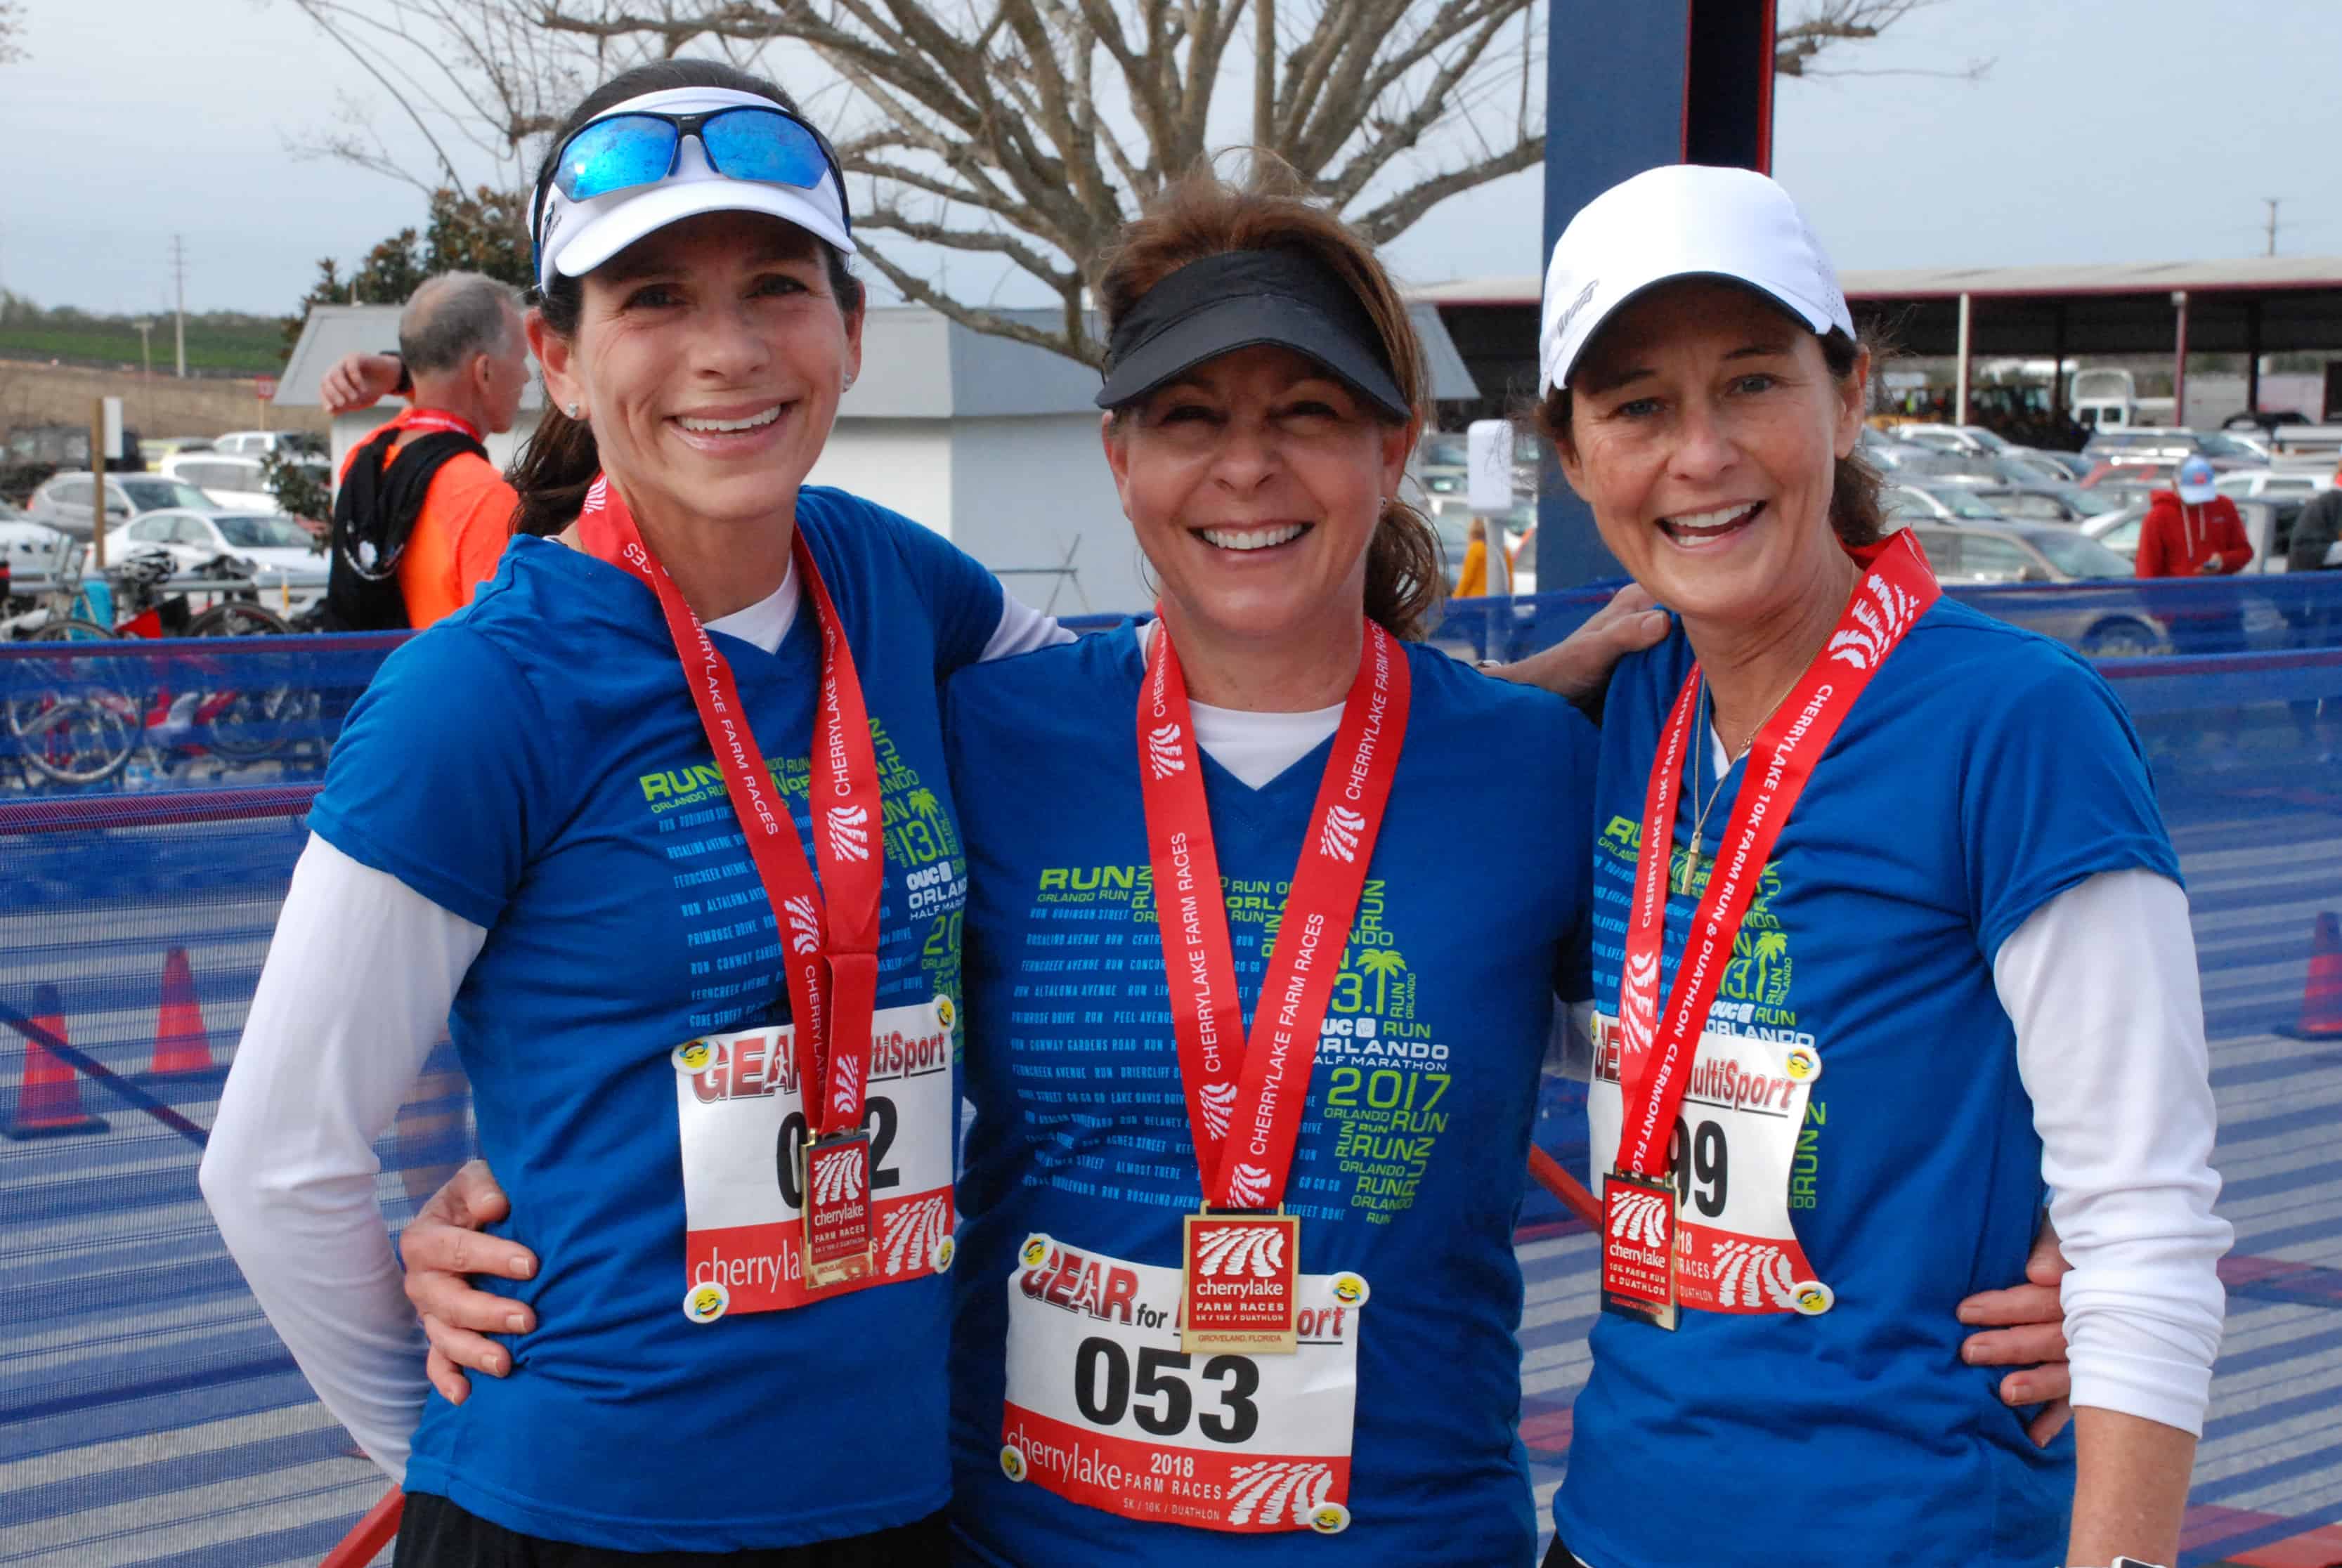 Three ladies wearing matching blue shirts stand together after a race at the finish line.